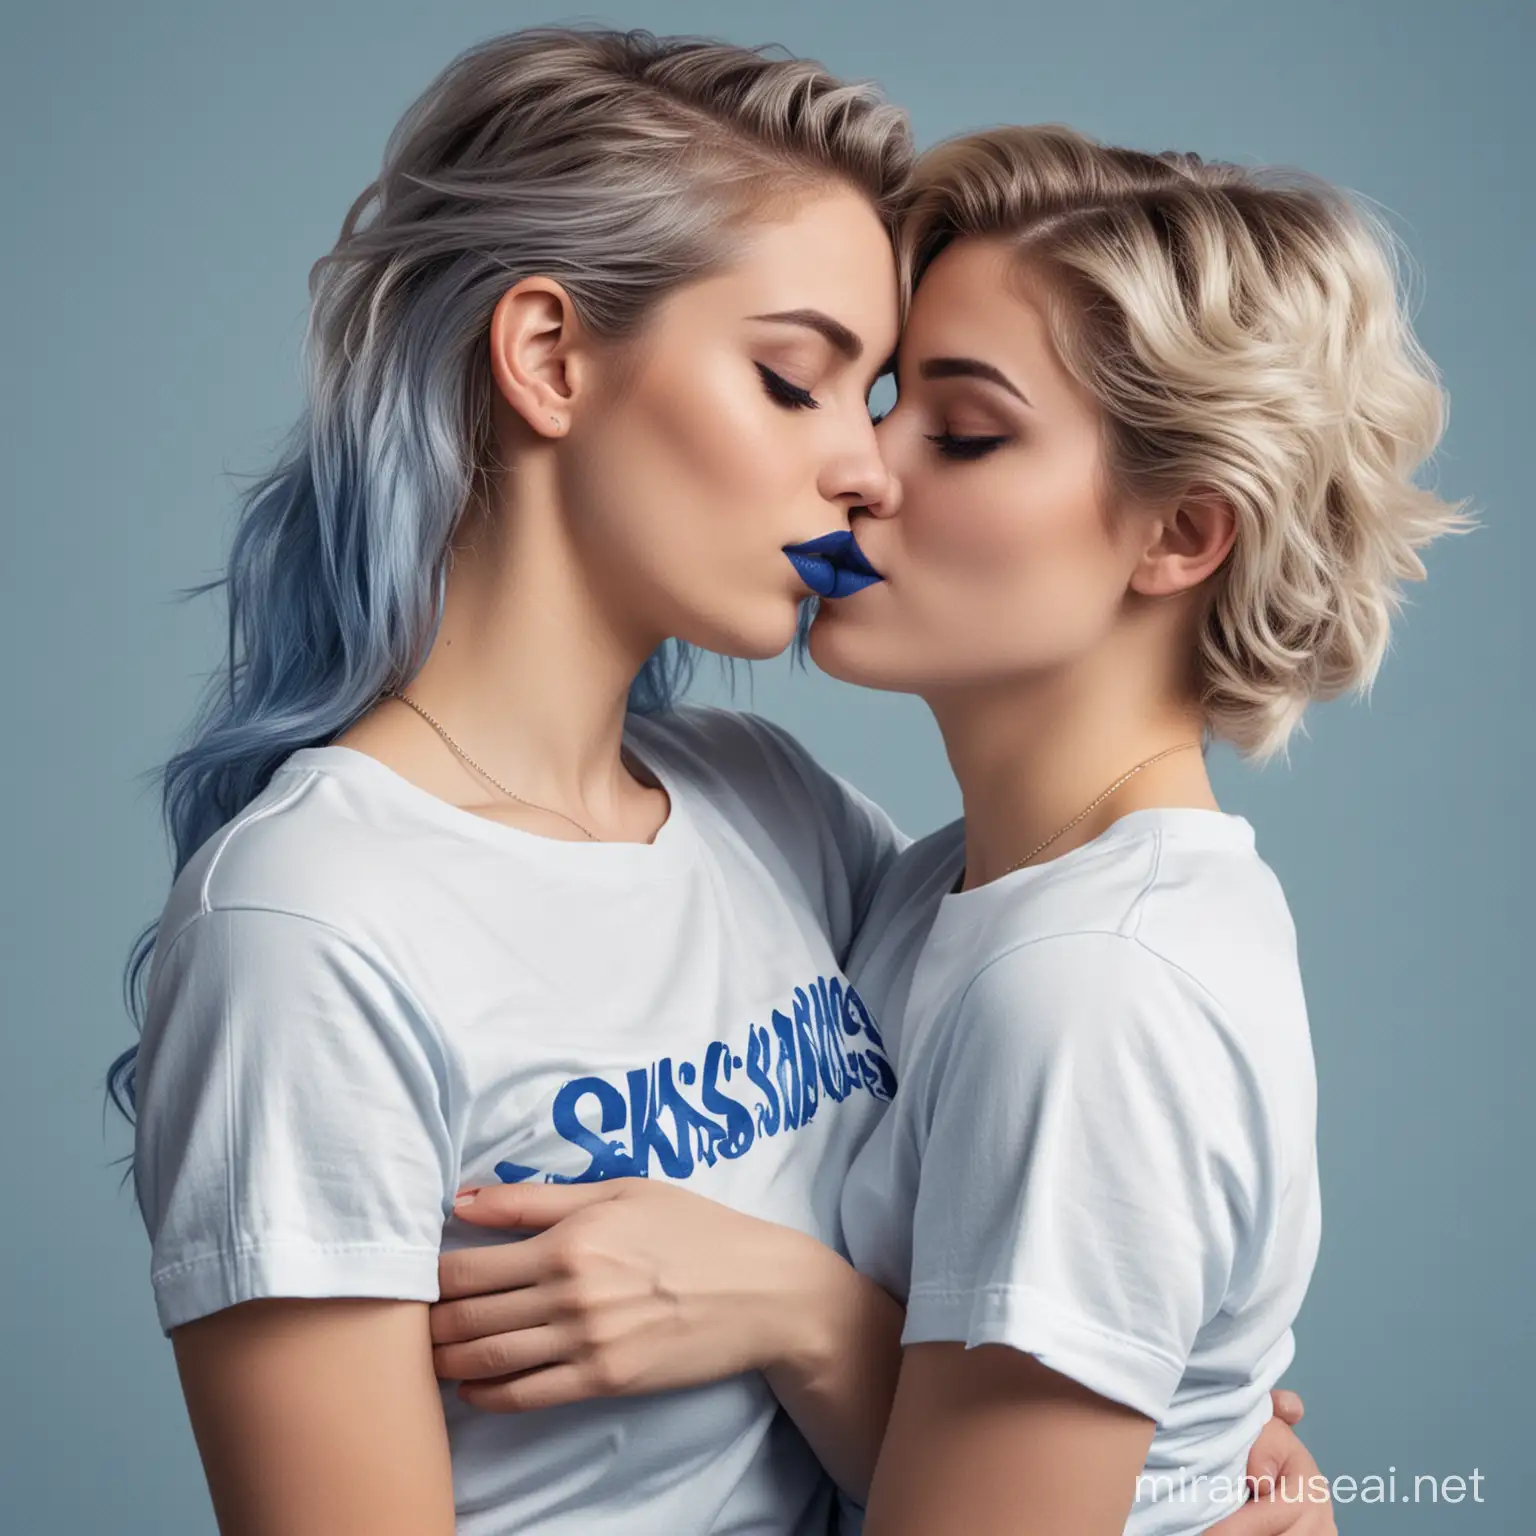 Two Lesbians hug skissing 21 years medium moyen weight hug two mouthe kissing and t-shirt blue royal colore and makeup blue royal colore lipstick blue royal and makeup blue royal and(realistic)